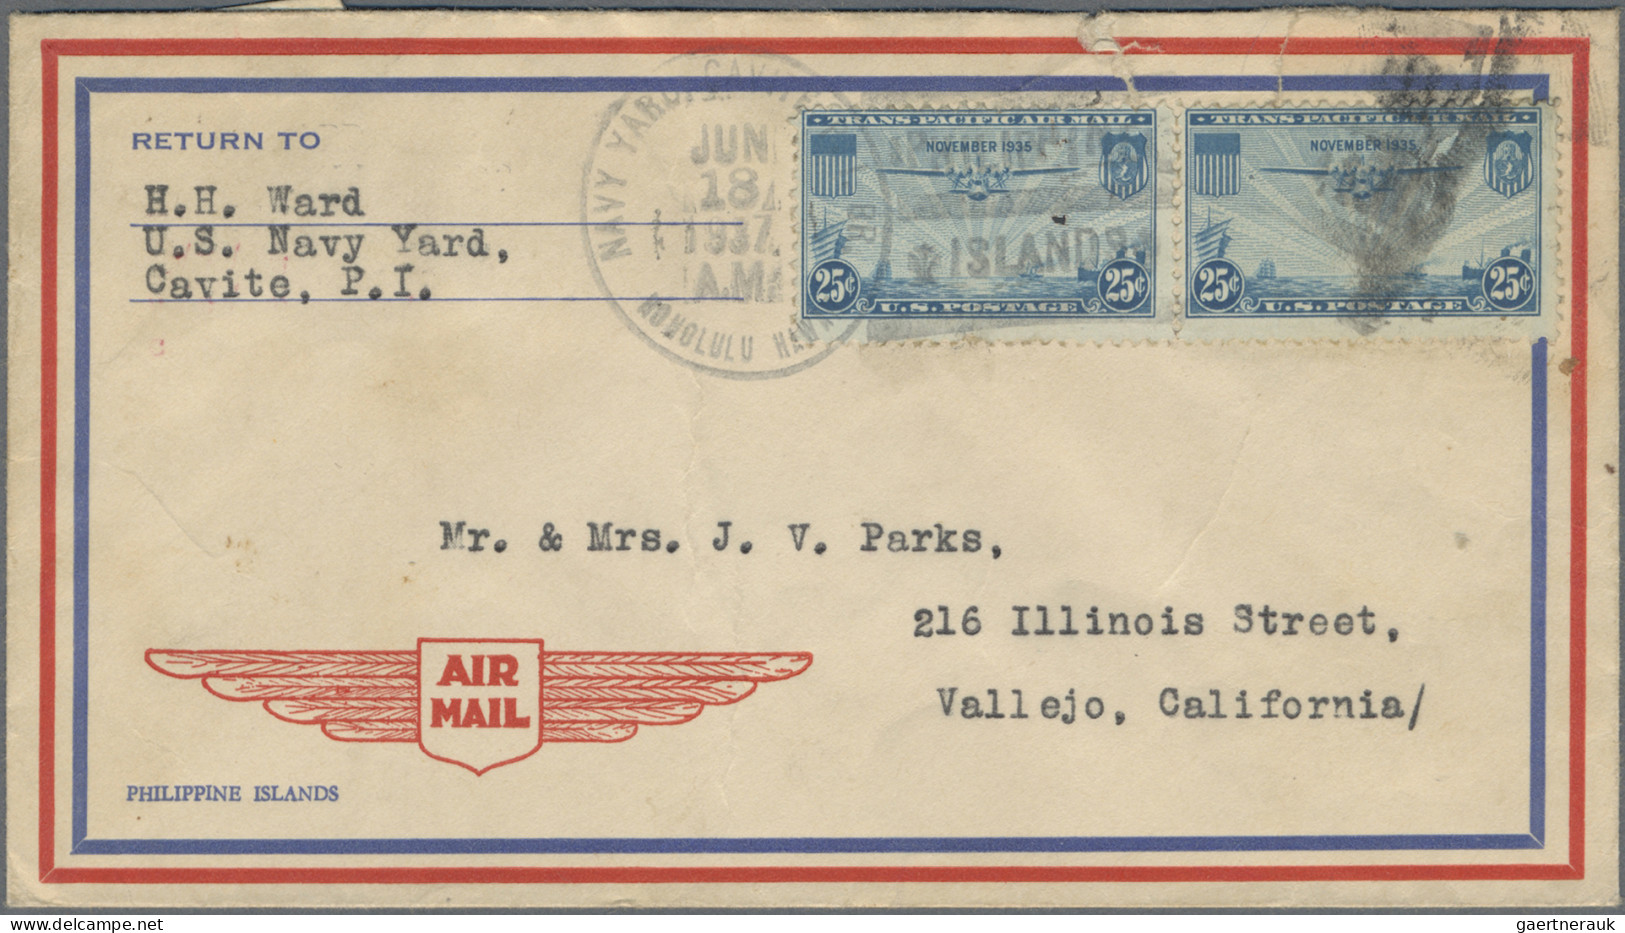 Hawaii: 1910/1950 (ca.), assortment of apprx. 69 covers/cards incl. a nice selec